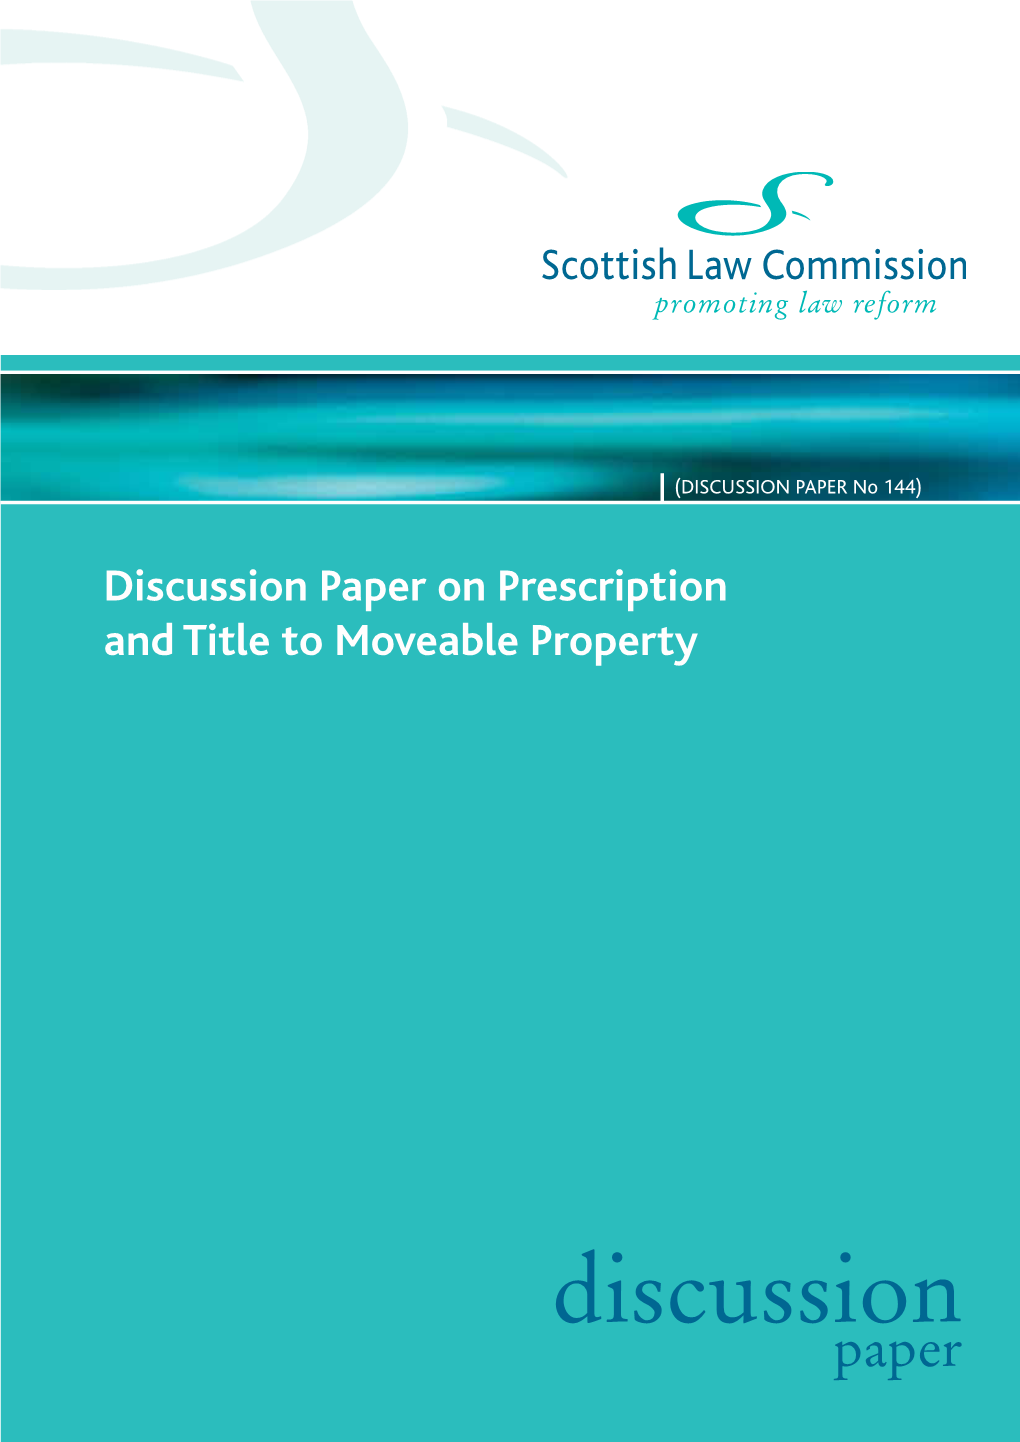 Discussion Paper on Prescription and Title to Moveable Property